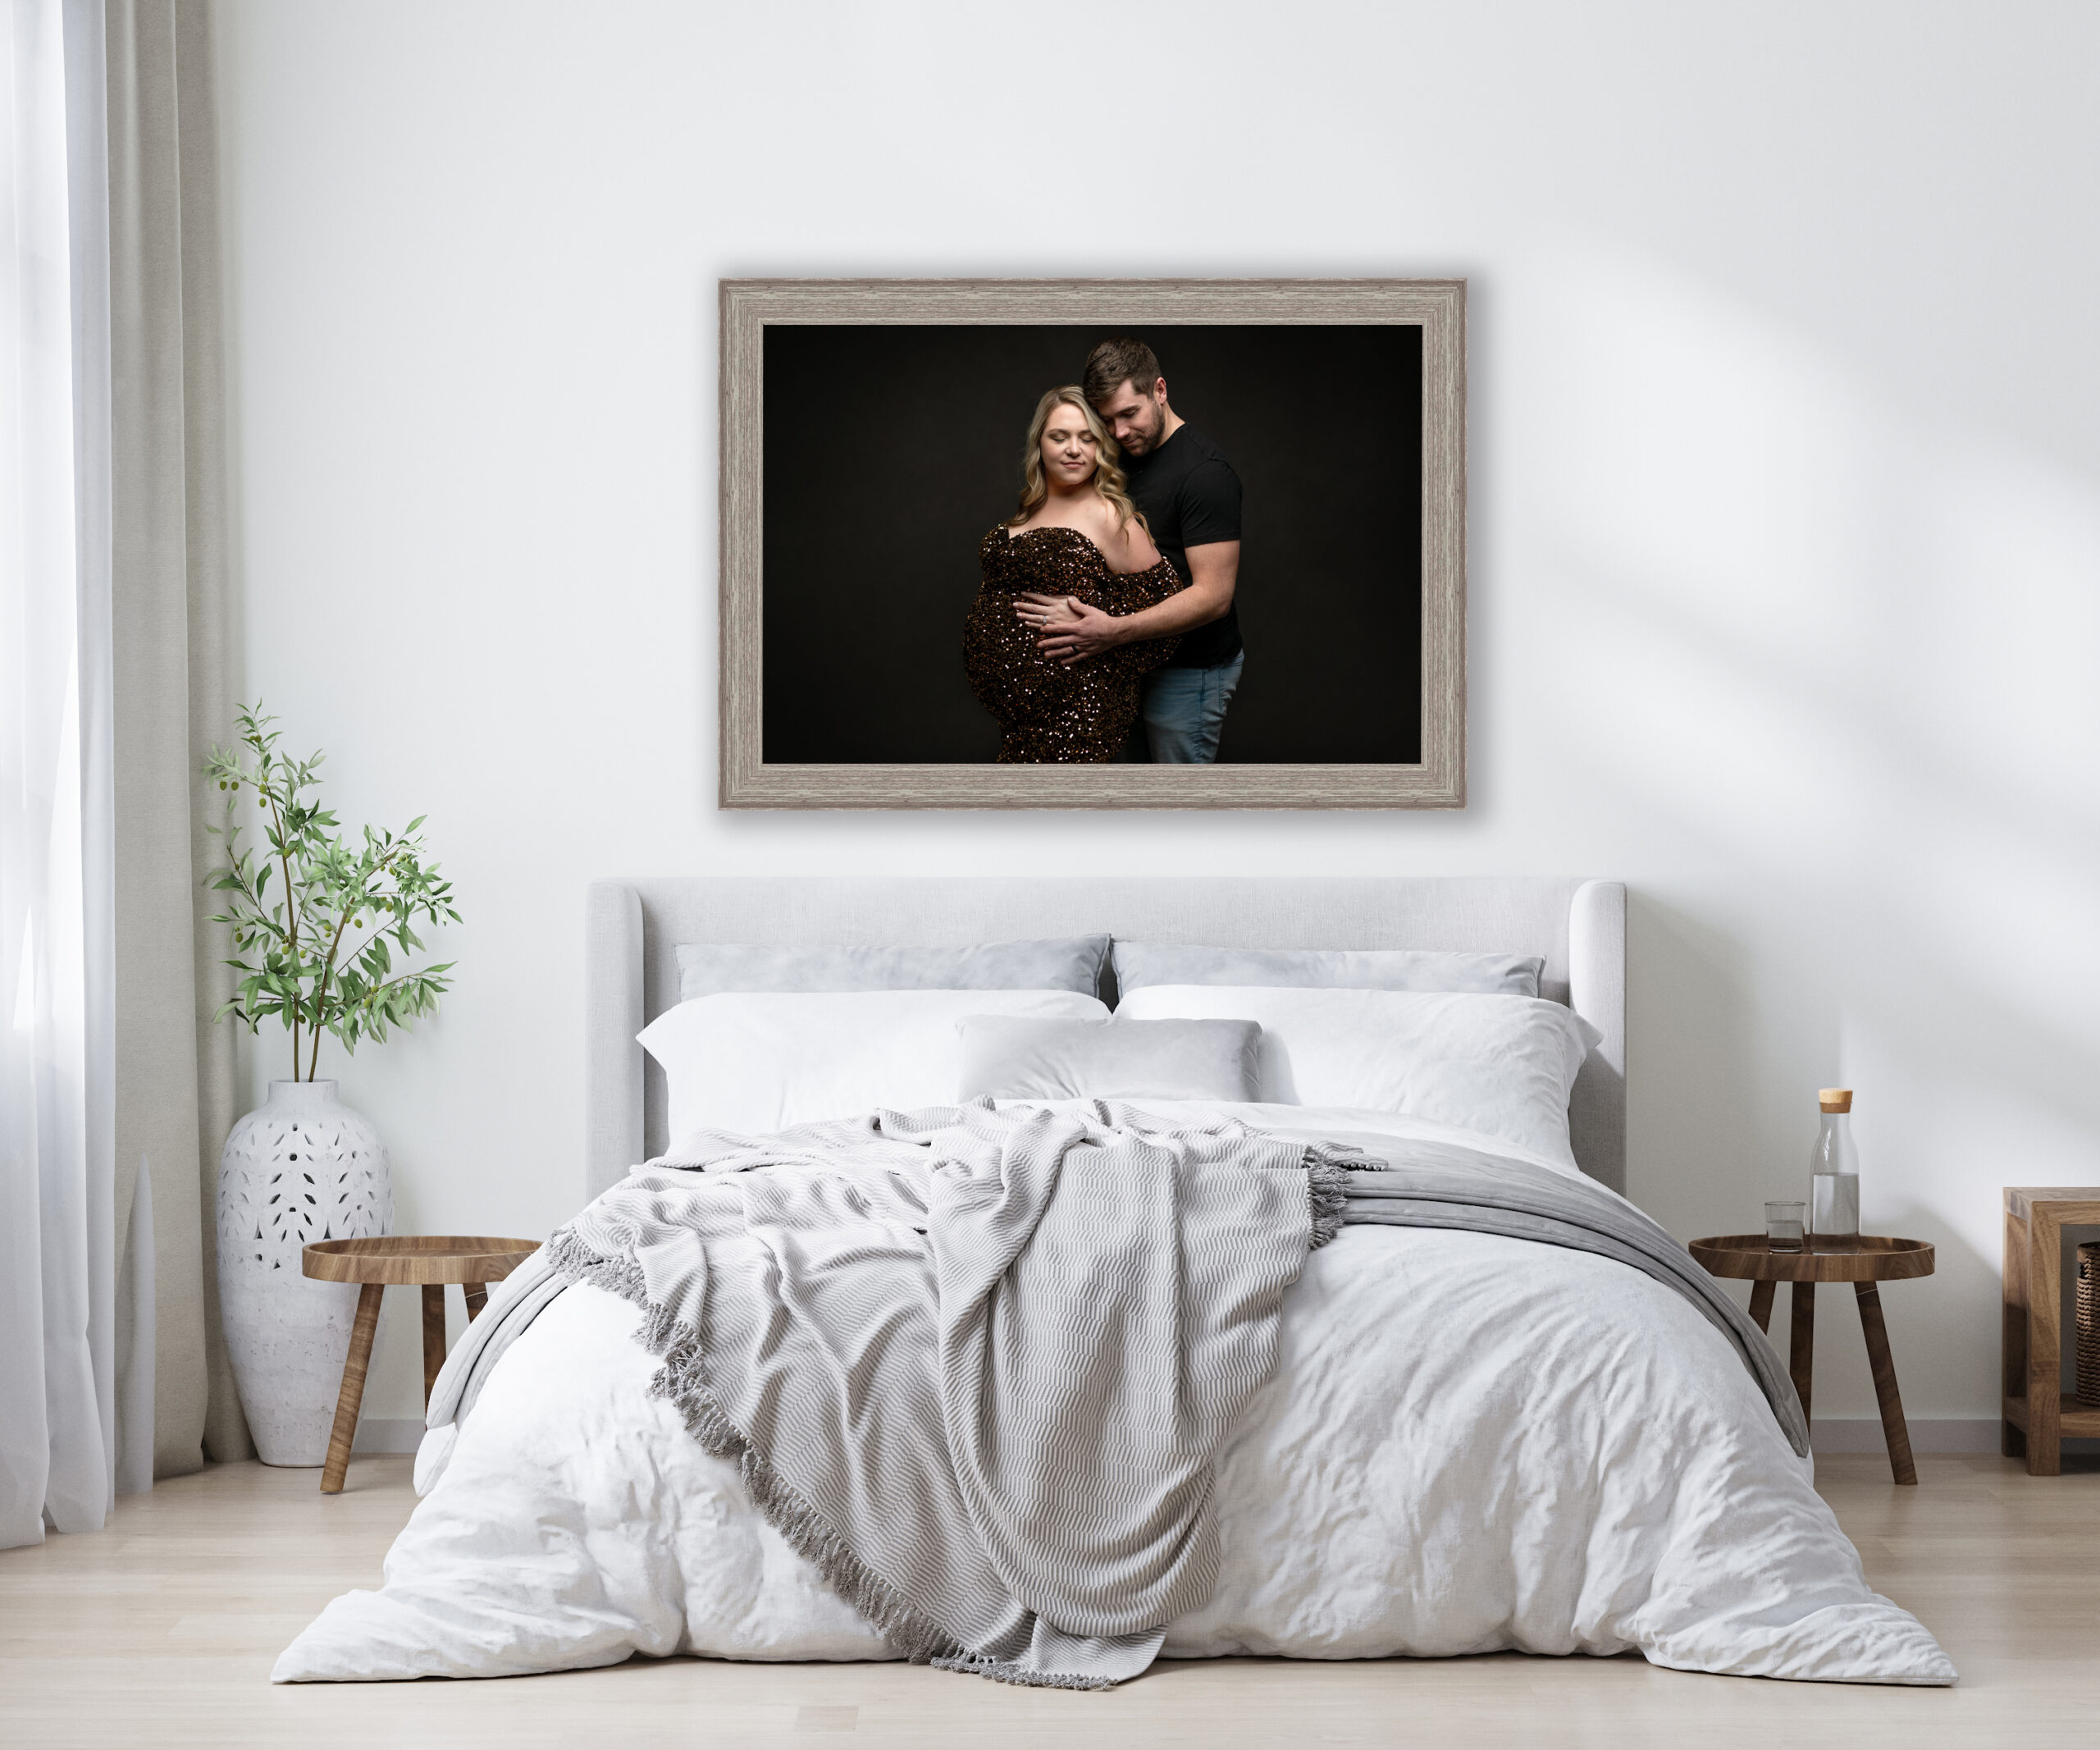 Maternity portrait displayed in a white themed bedroom.